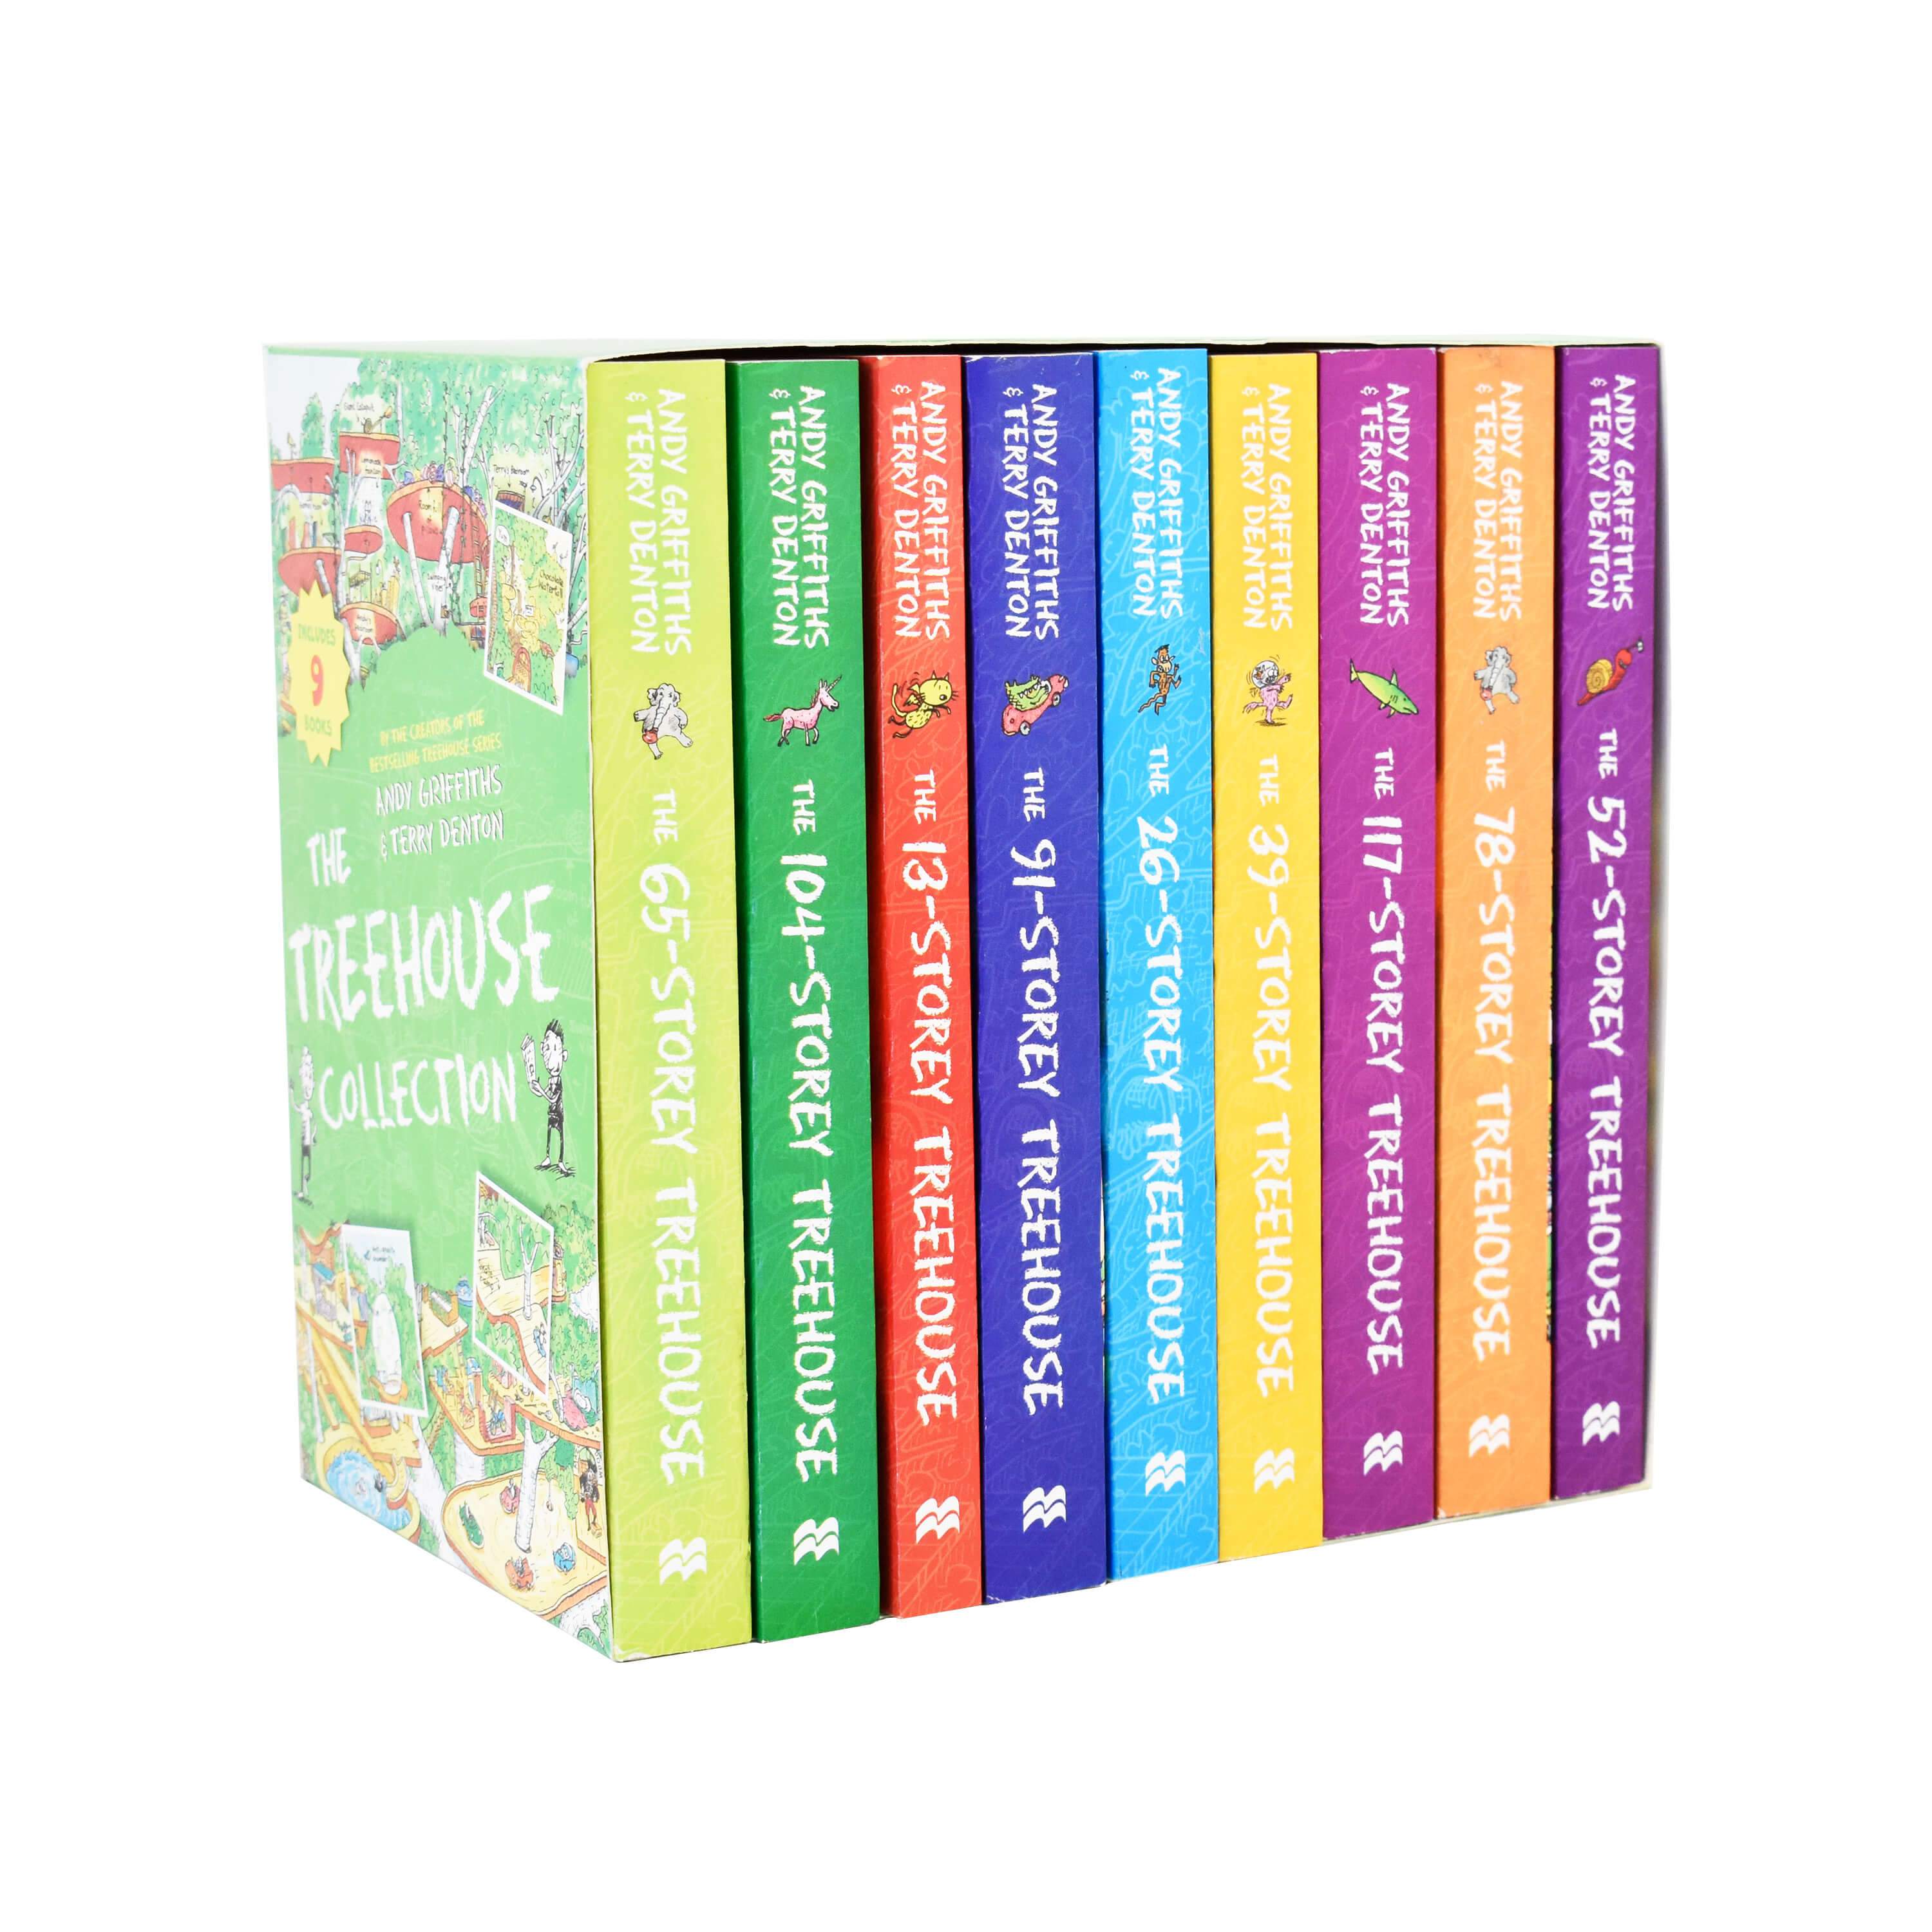 Age 7-9 - Treehouse 9 Books Children Collection Pack Paperback Gift Set By Andy Griffiths